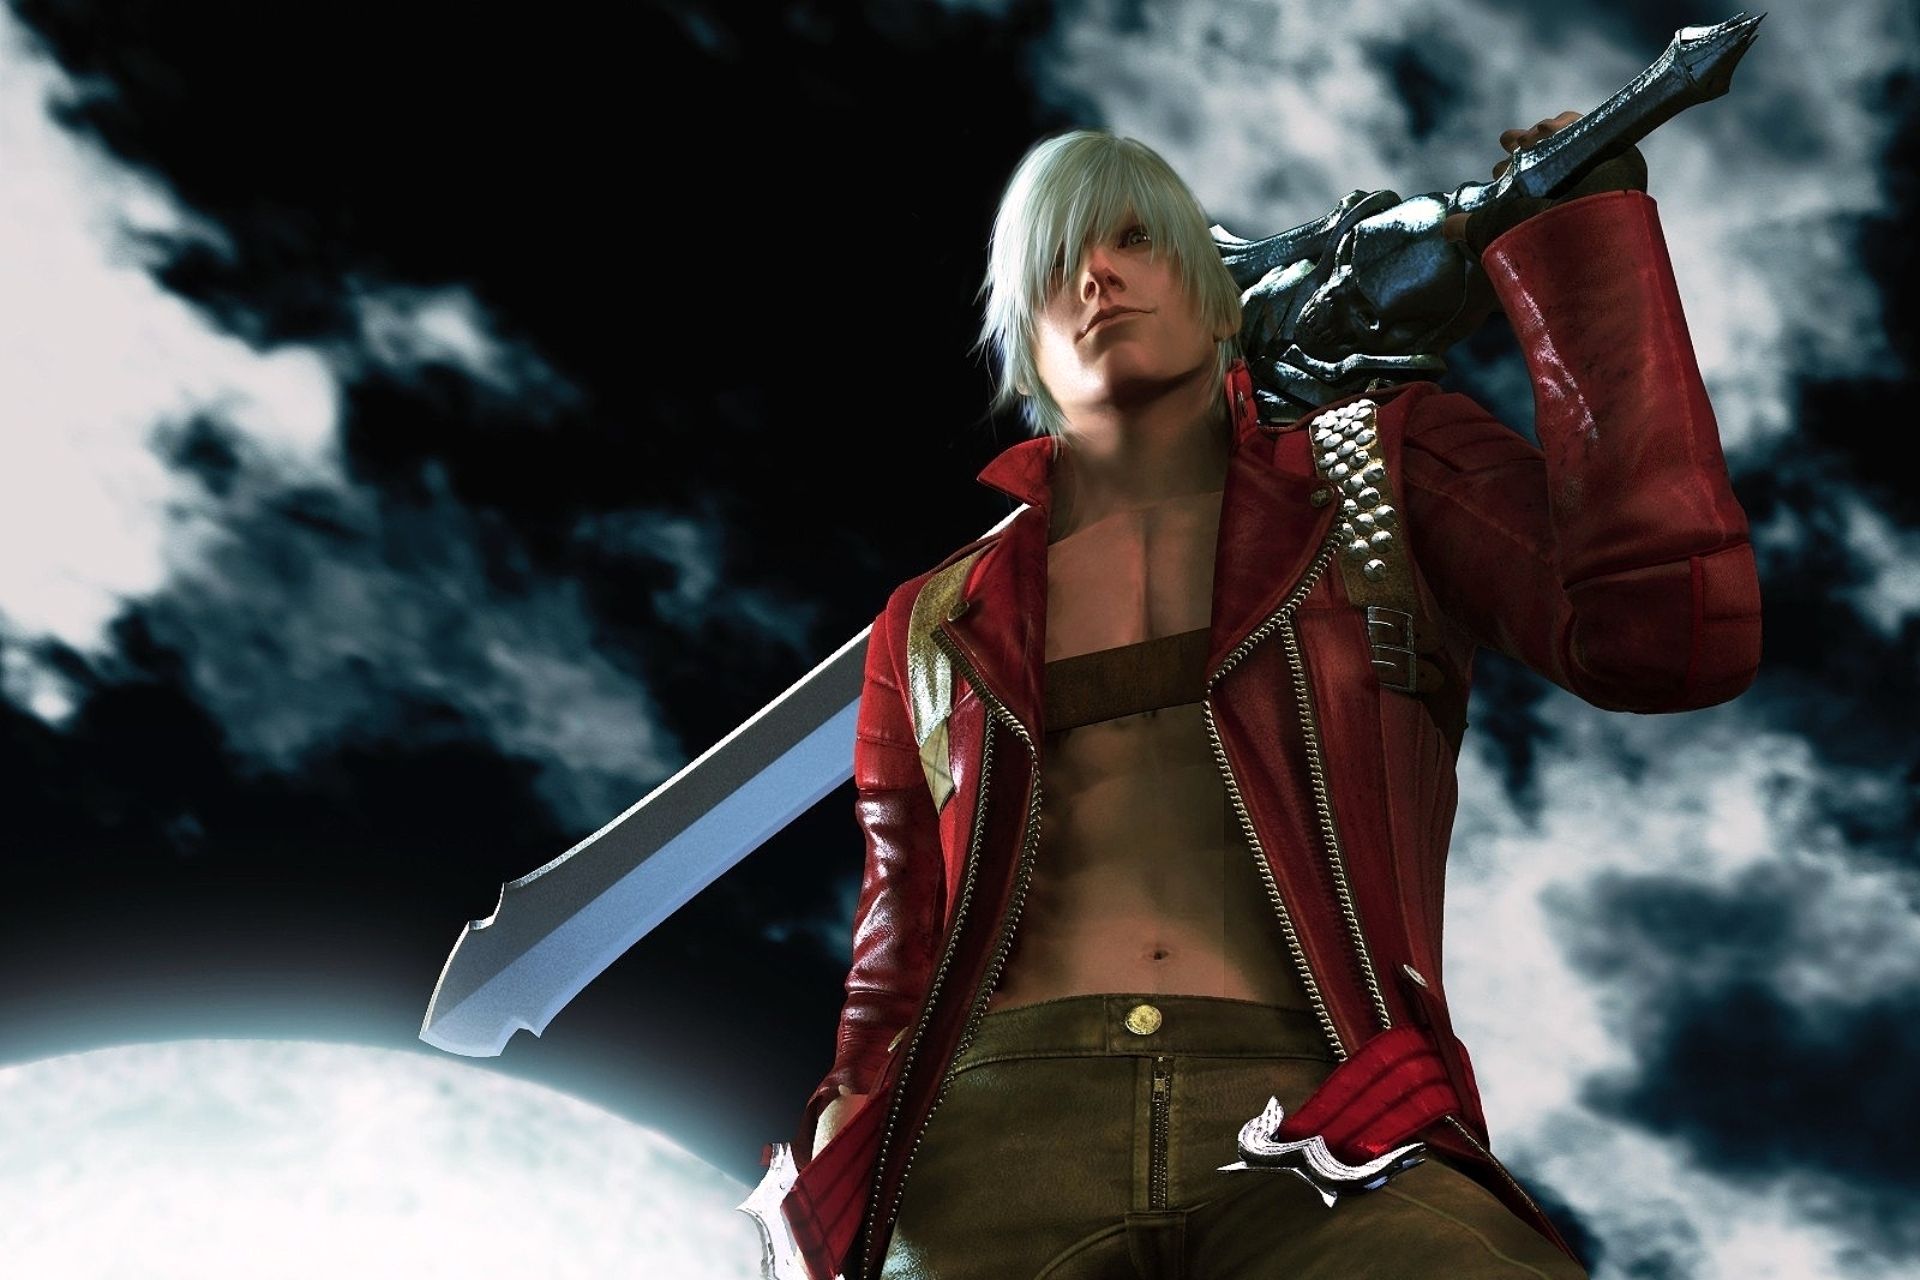 Devil May Cry HD Collection Coming To PS4, Xbox One, And PC - GameSpot